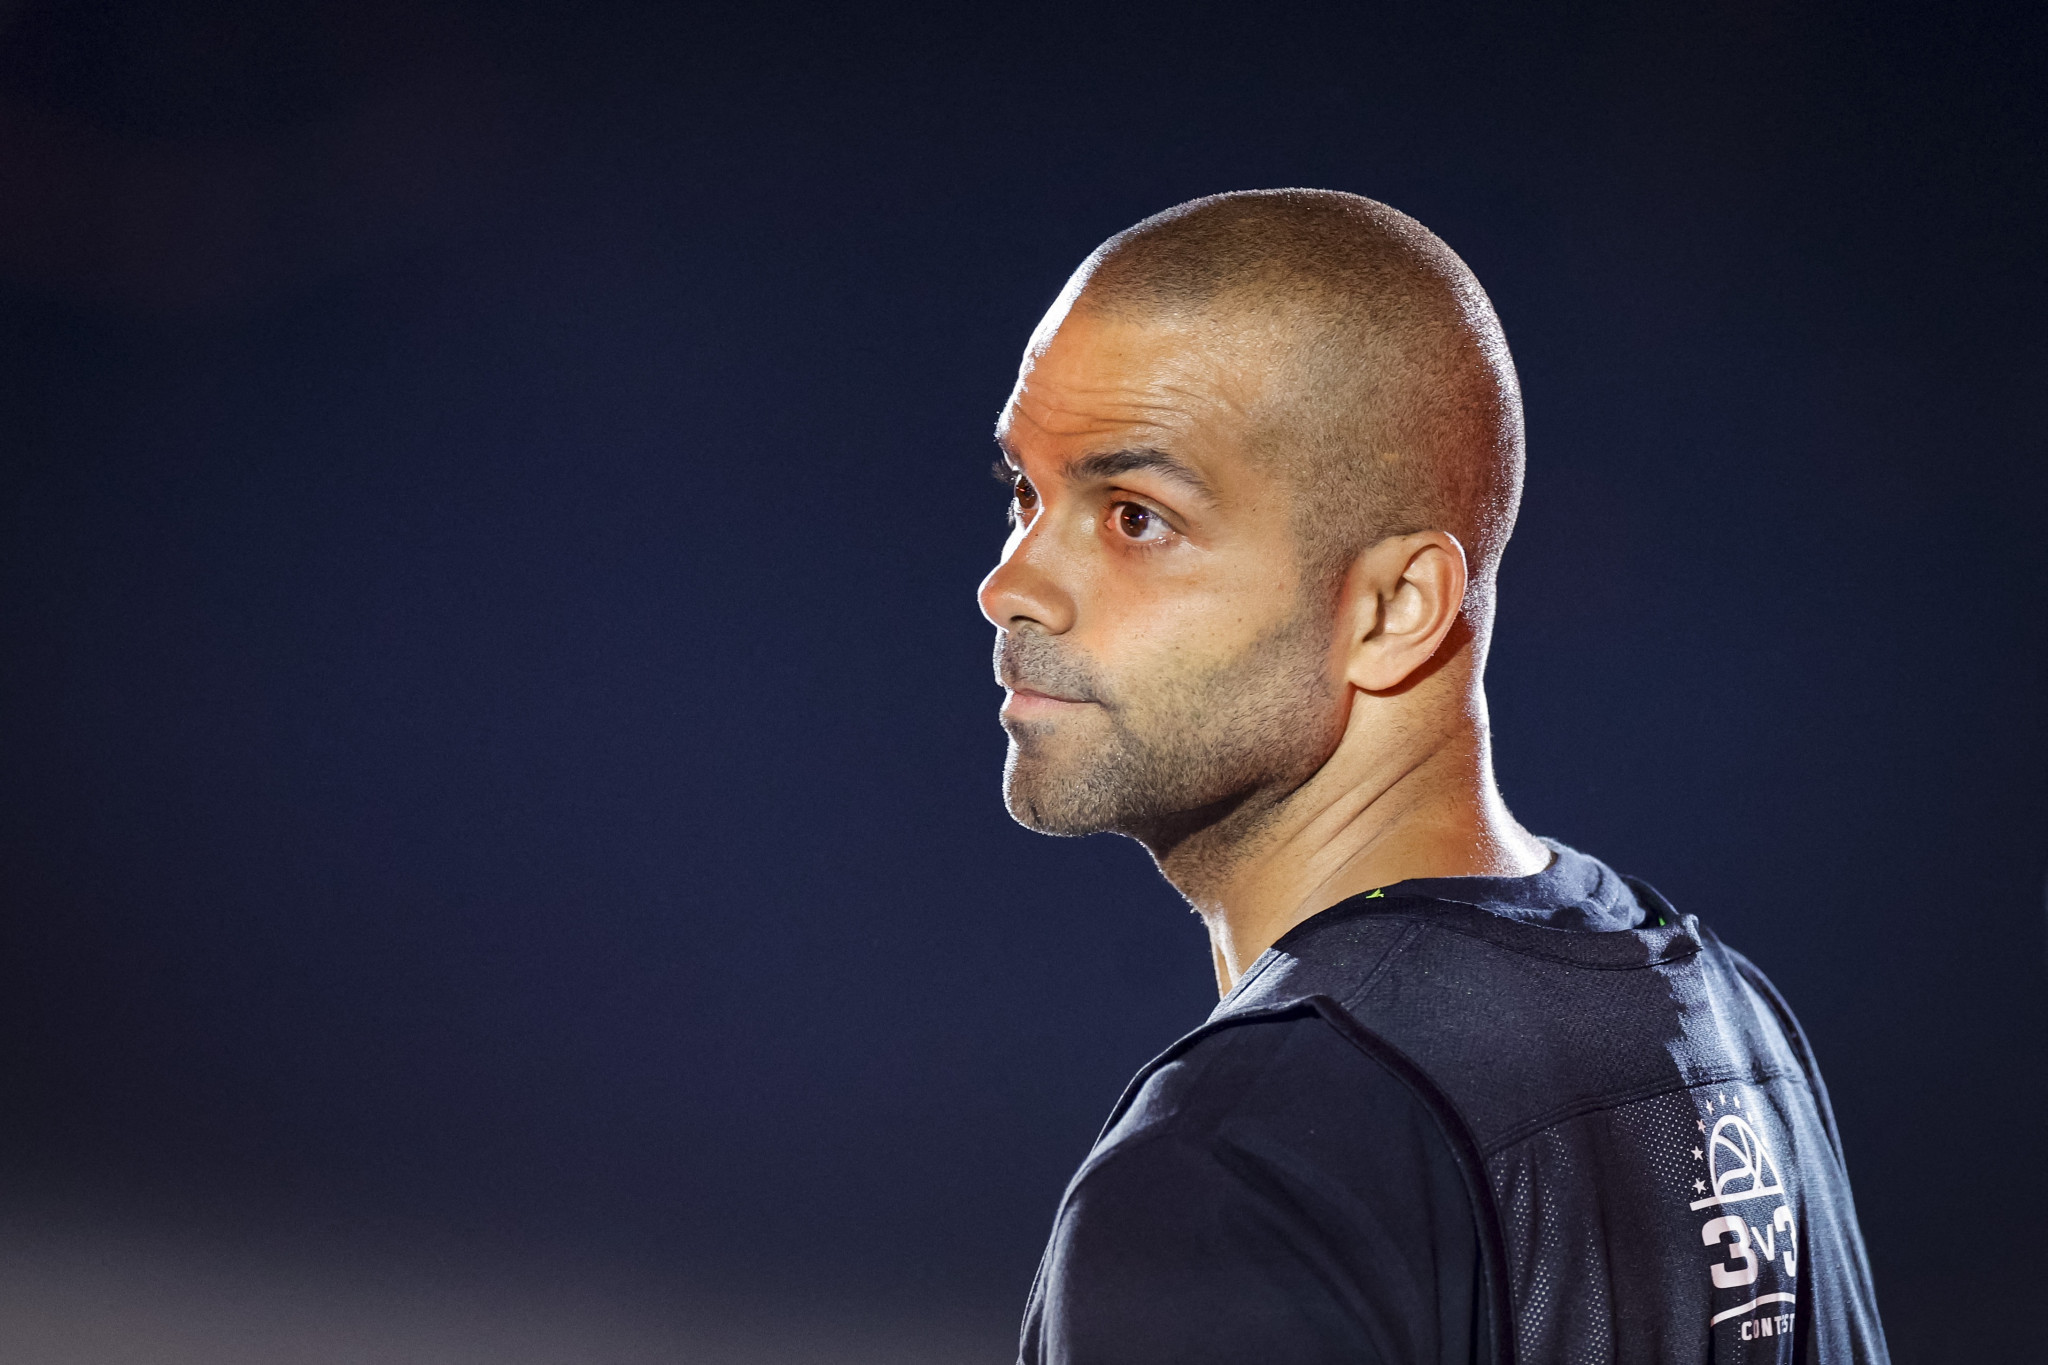 French basketball legend Tony Parker, who was tipped to become the country's Sports Minister last year before Amélie Oudéa-Castéra was appointed, is due to speak in the form of a video message to the conference in Baku ©Getty Images